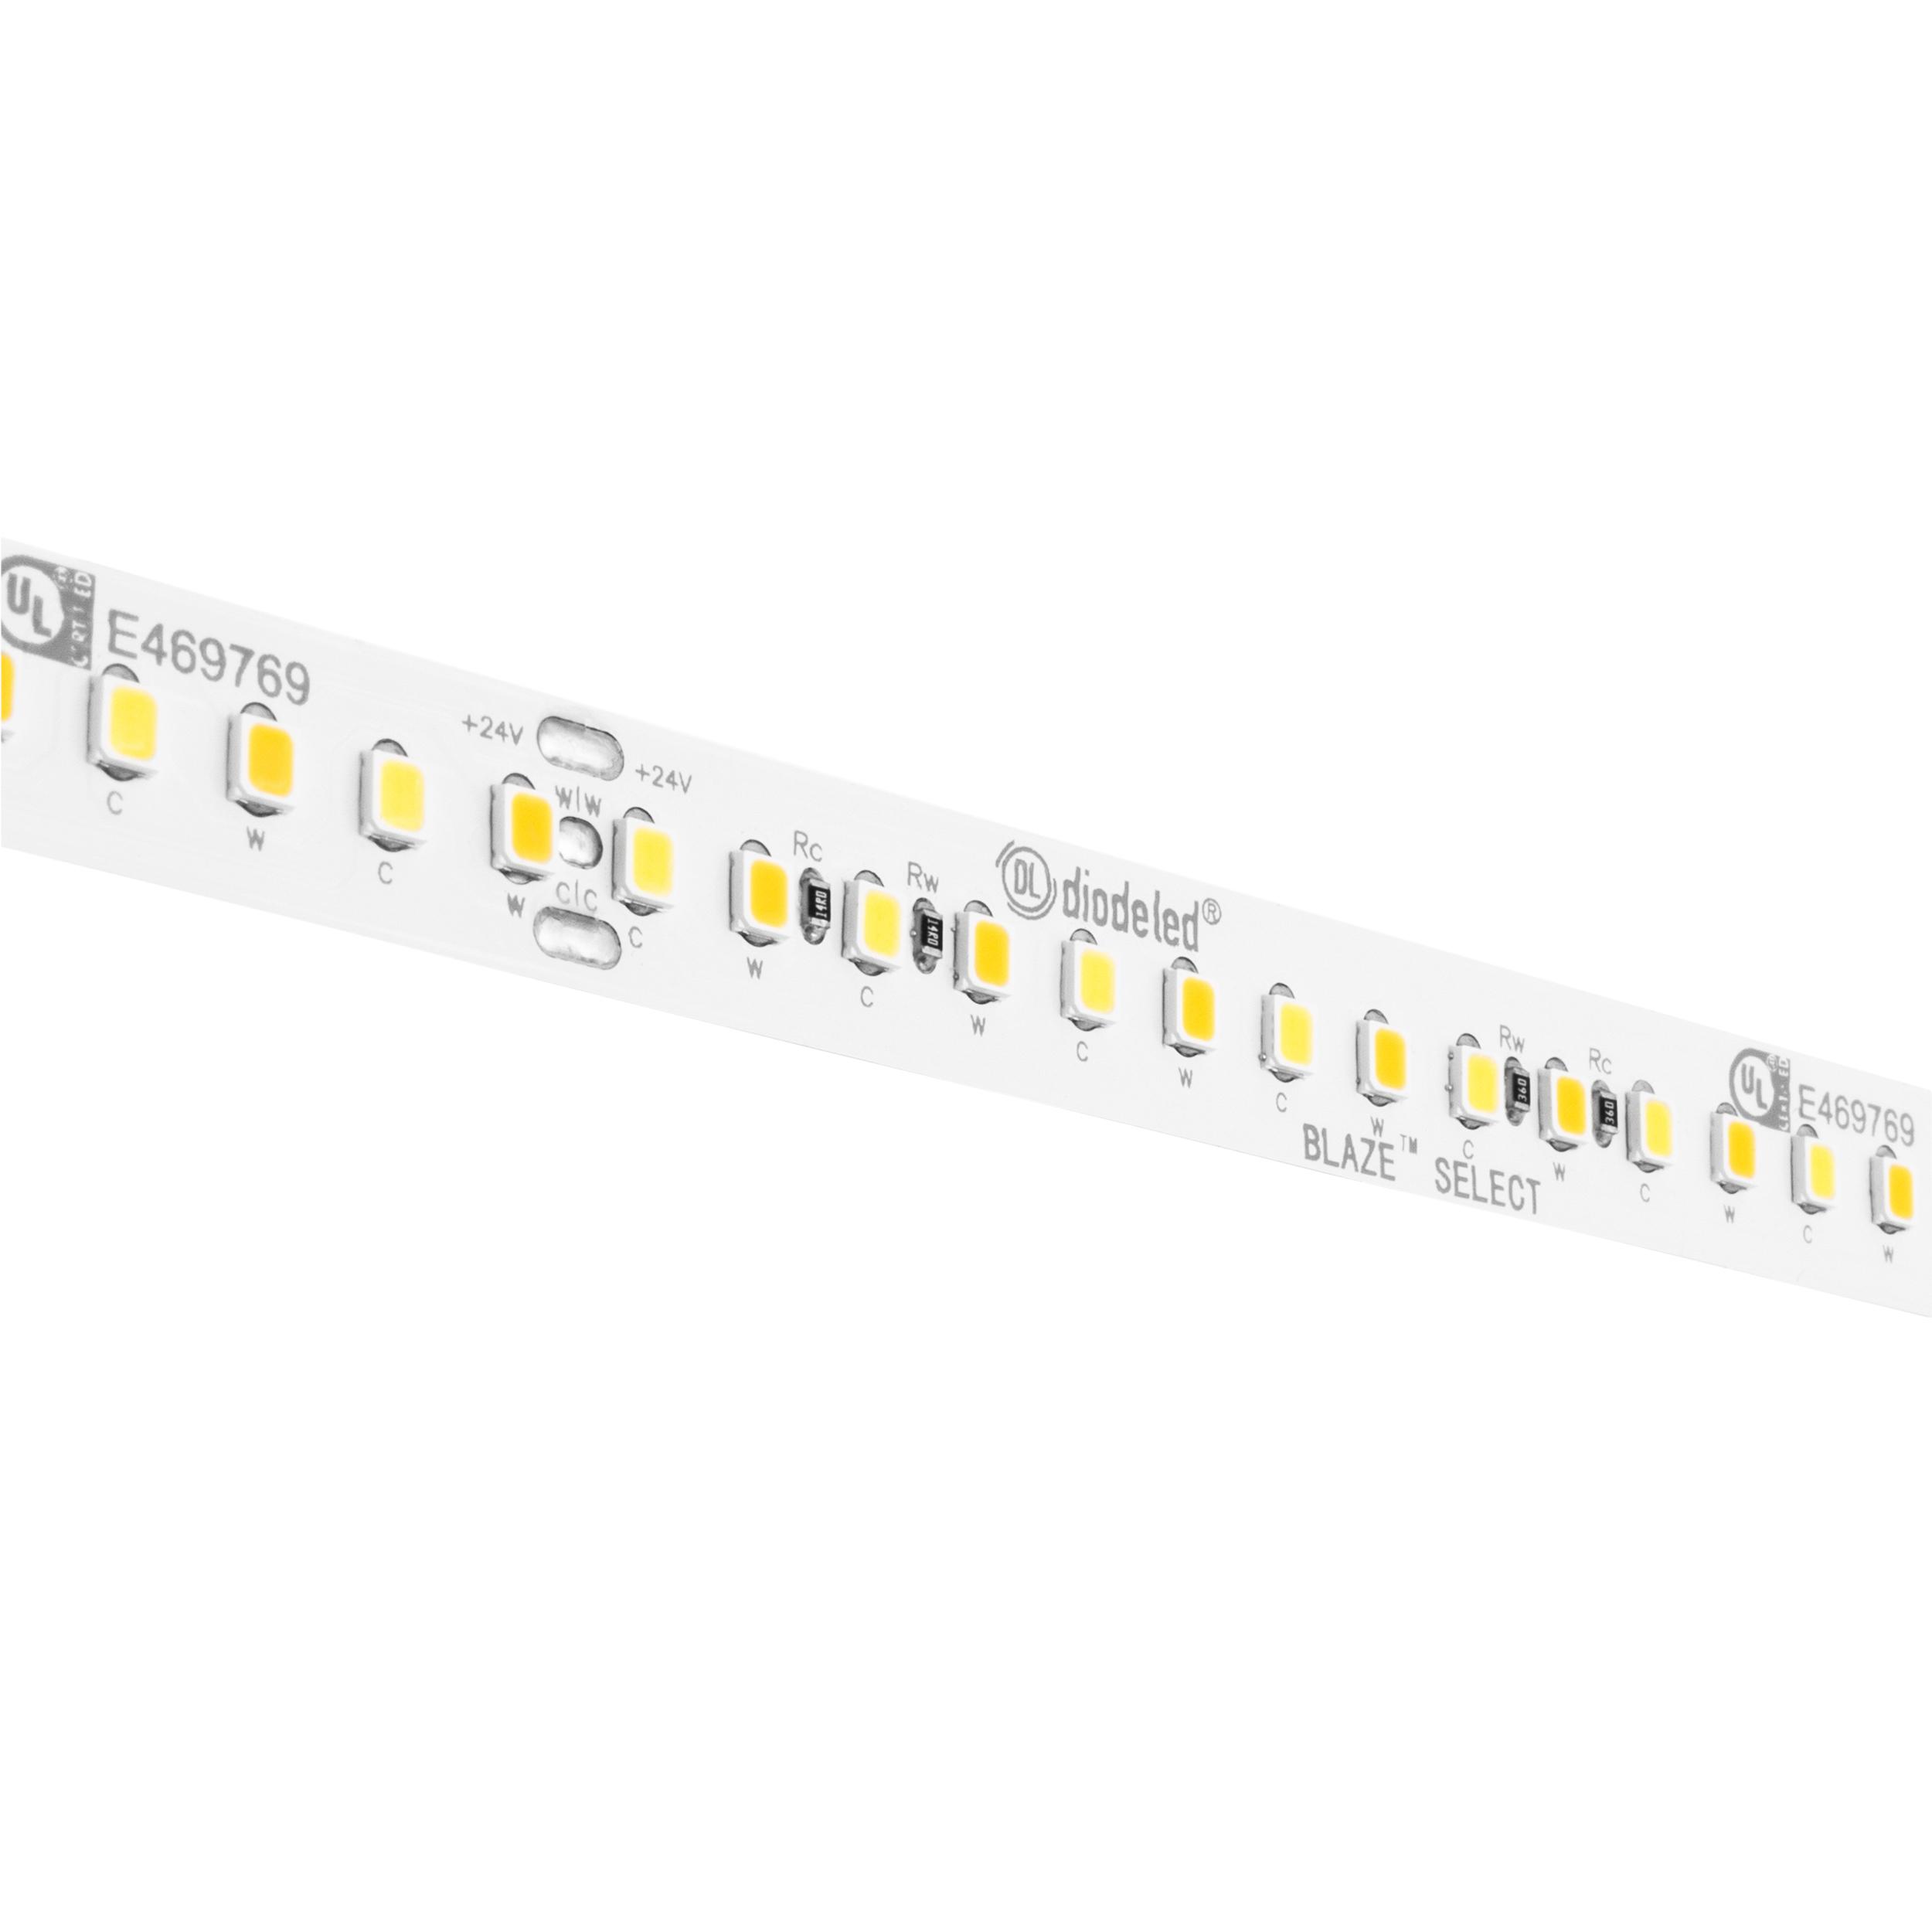 BLAZE™ SELECT Tunable White Linear LED Lighting System | Diode LED